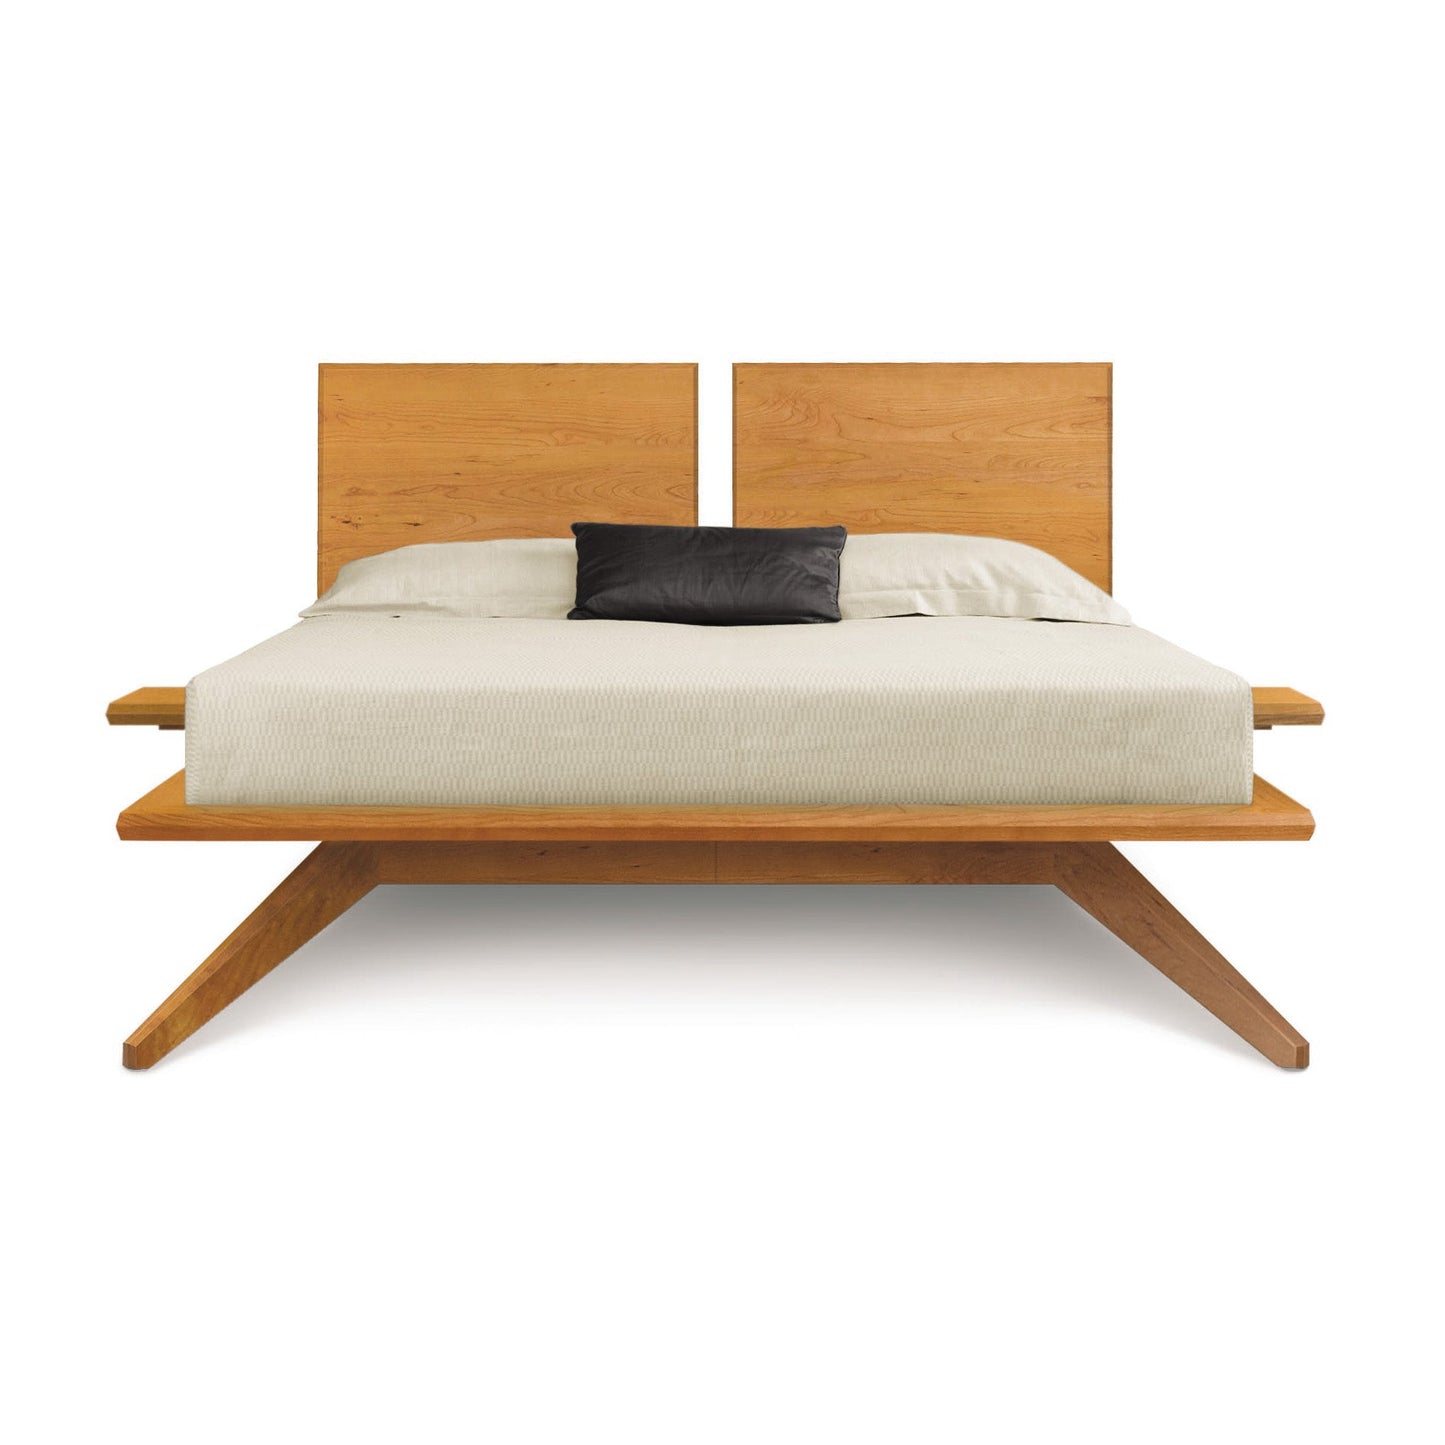 A wooden bed with a wooden headboard and footboard.